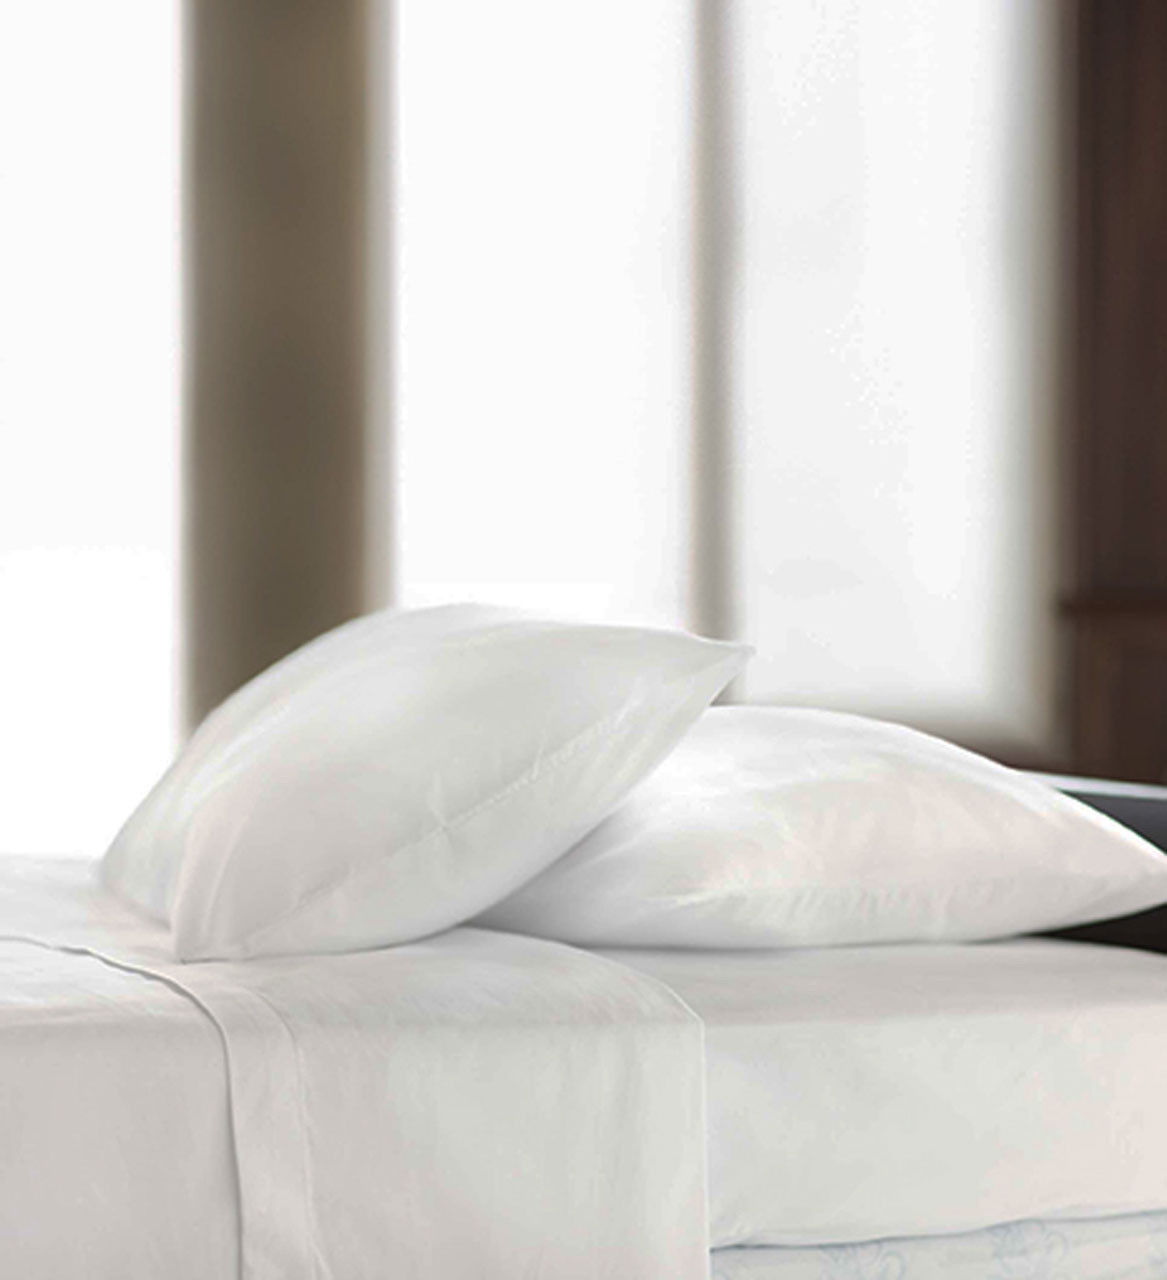 What does "Room Ready For You" mean in relation to Centium Satin Sheets?